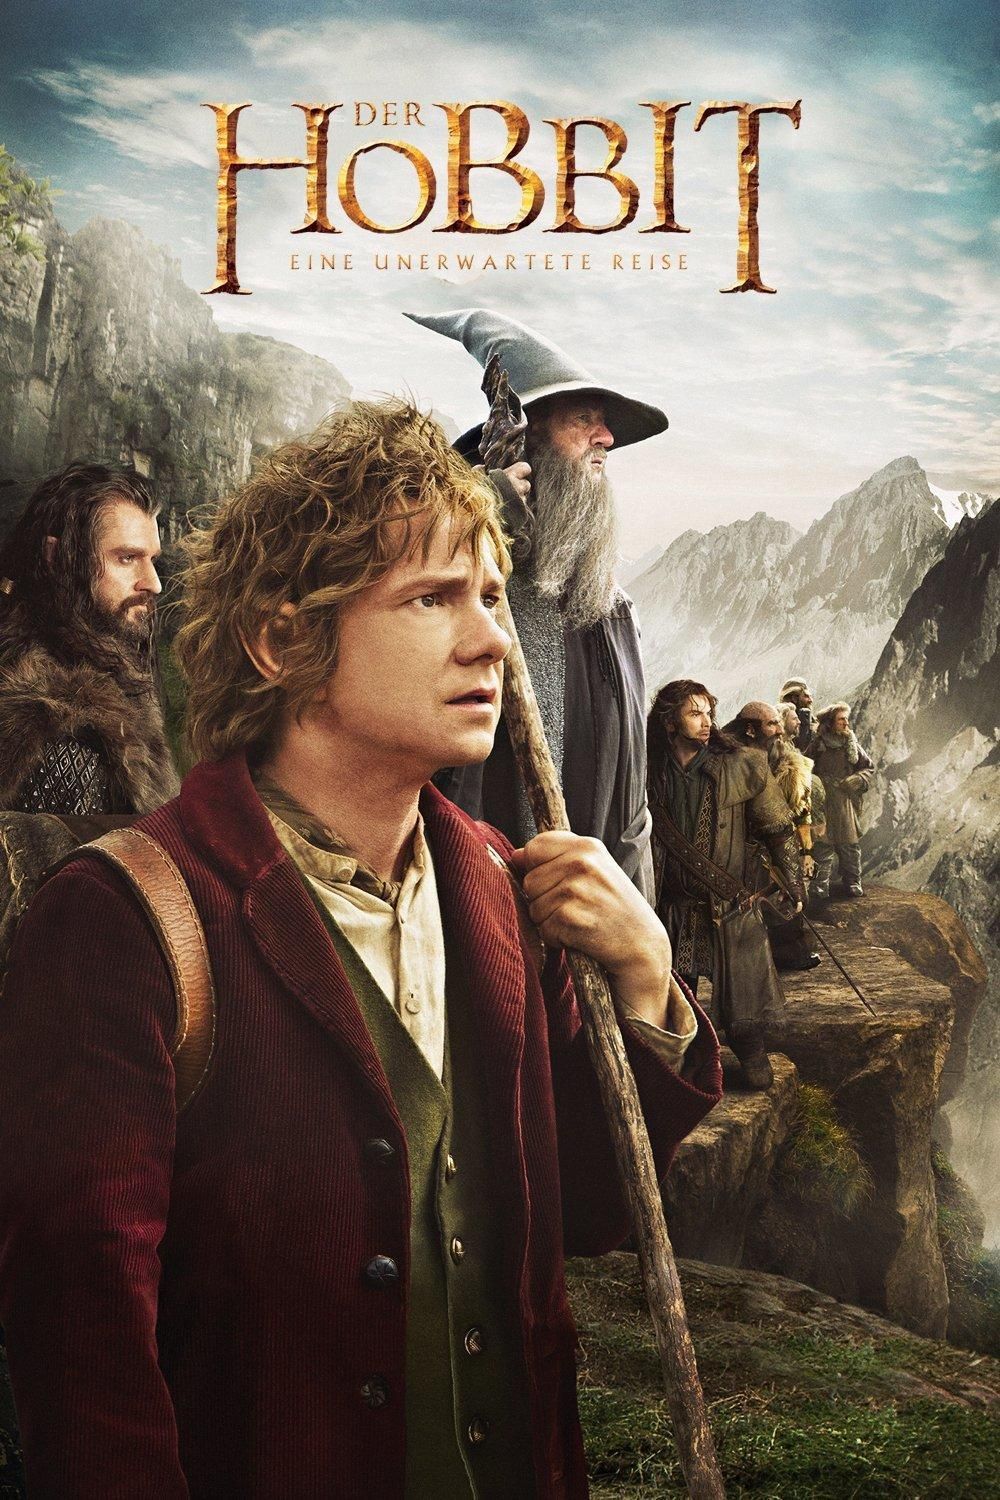 The Hobbit: An Unexpected Journey (2012) Movie Information & Trailers